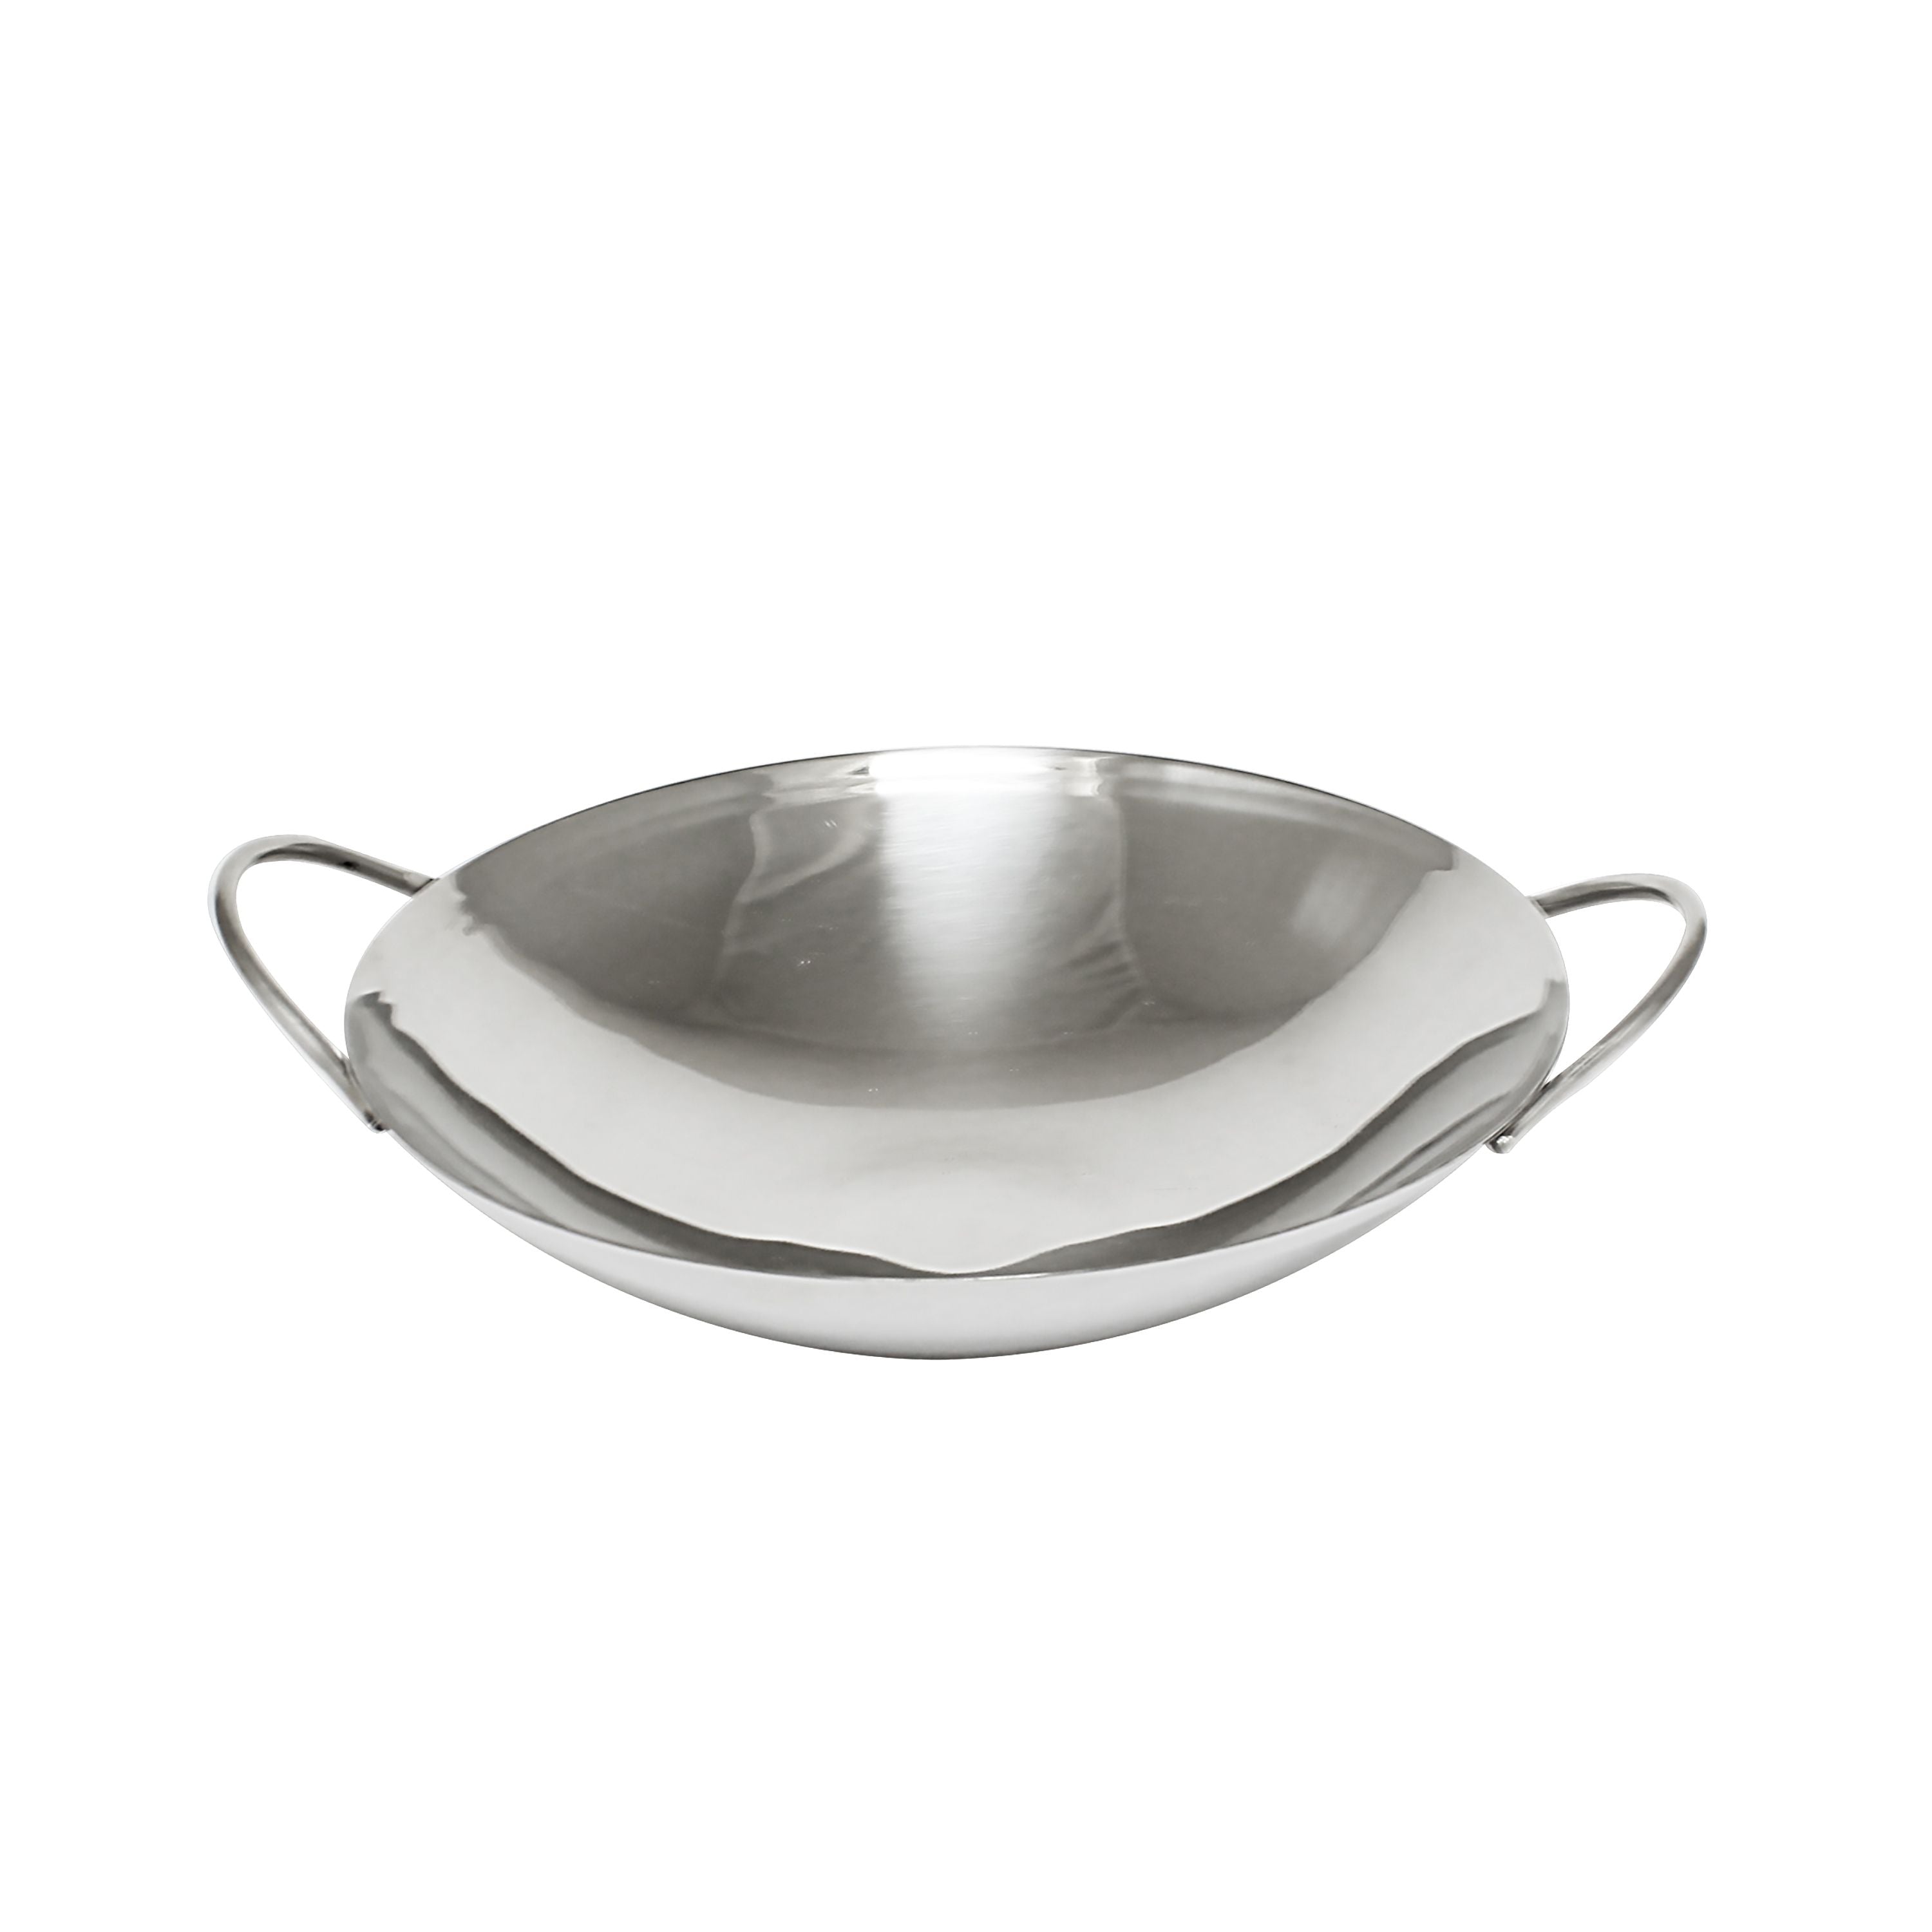 Thunder Group SLWK008 8-Inch Stainless Steel Wok with Dual Side Handles